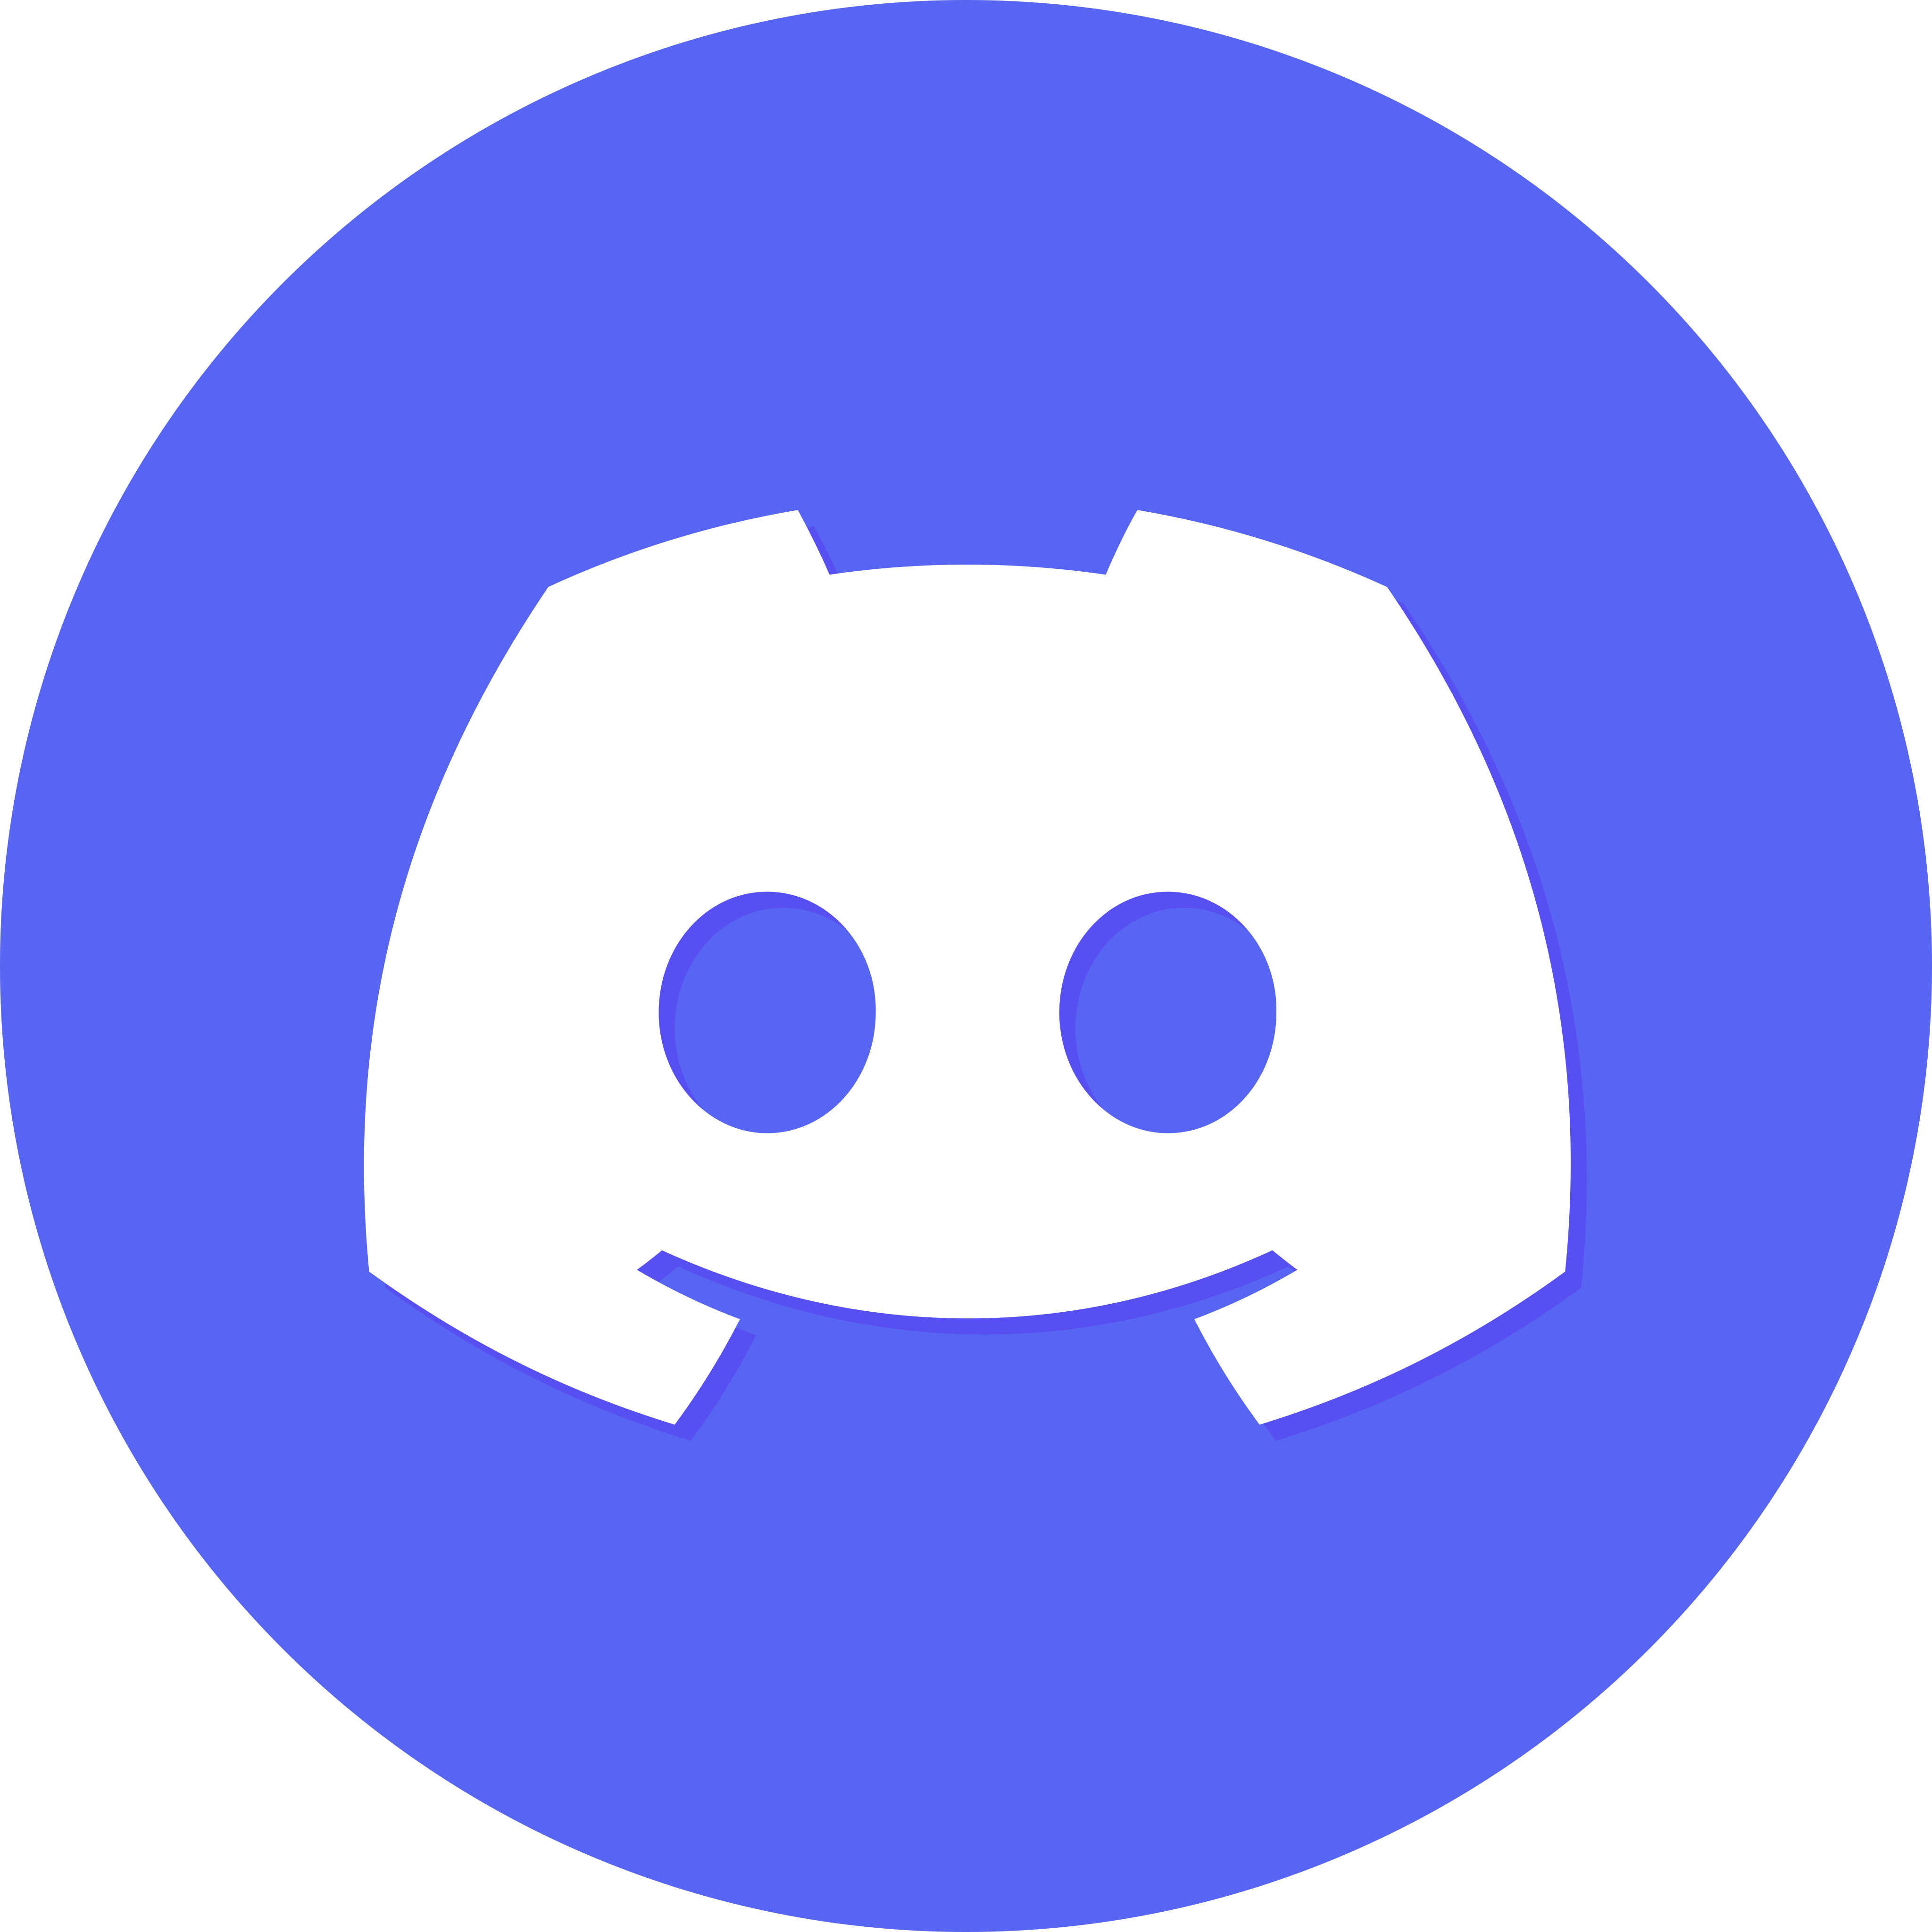 Alexis Perrier on Discord